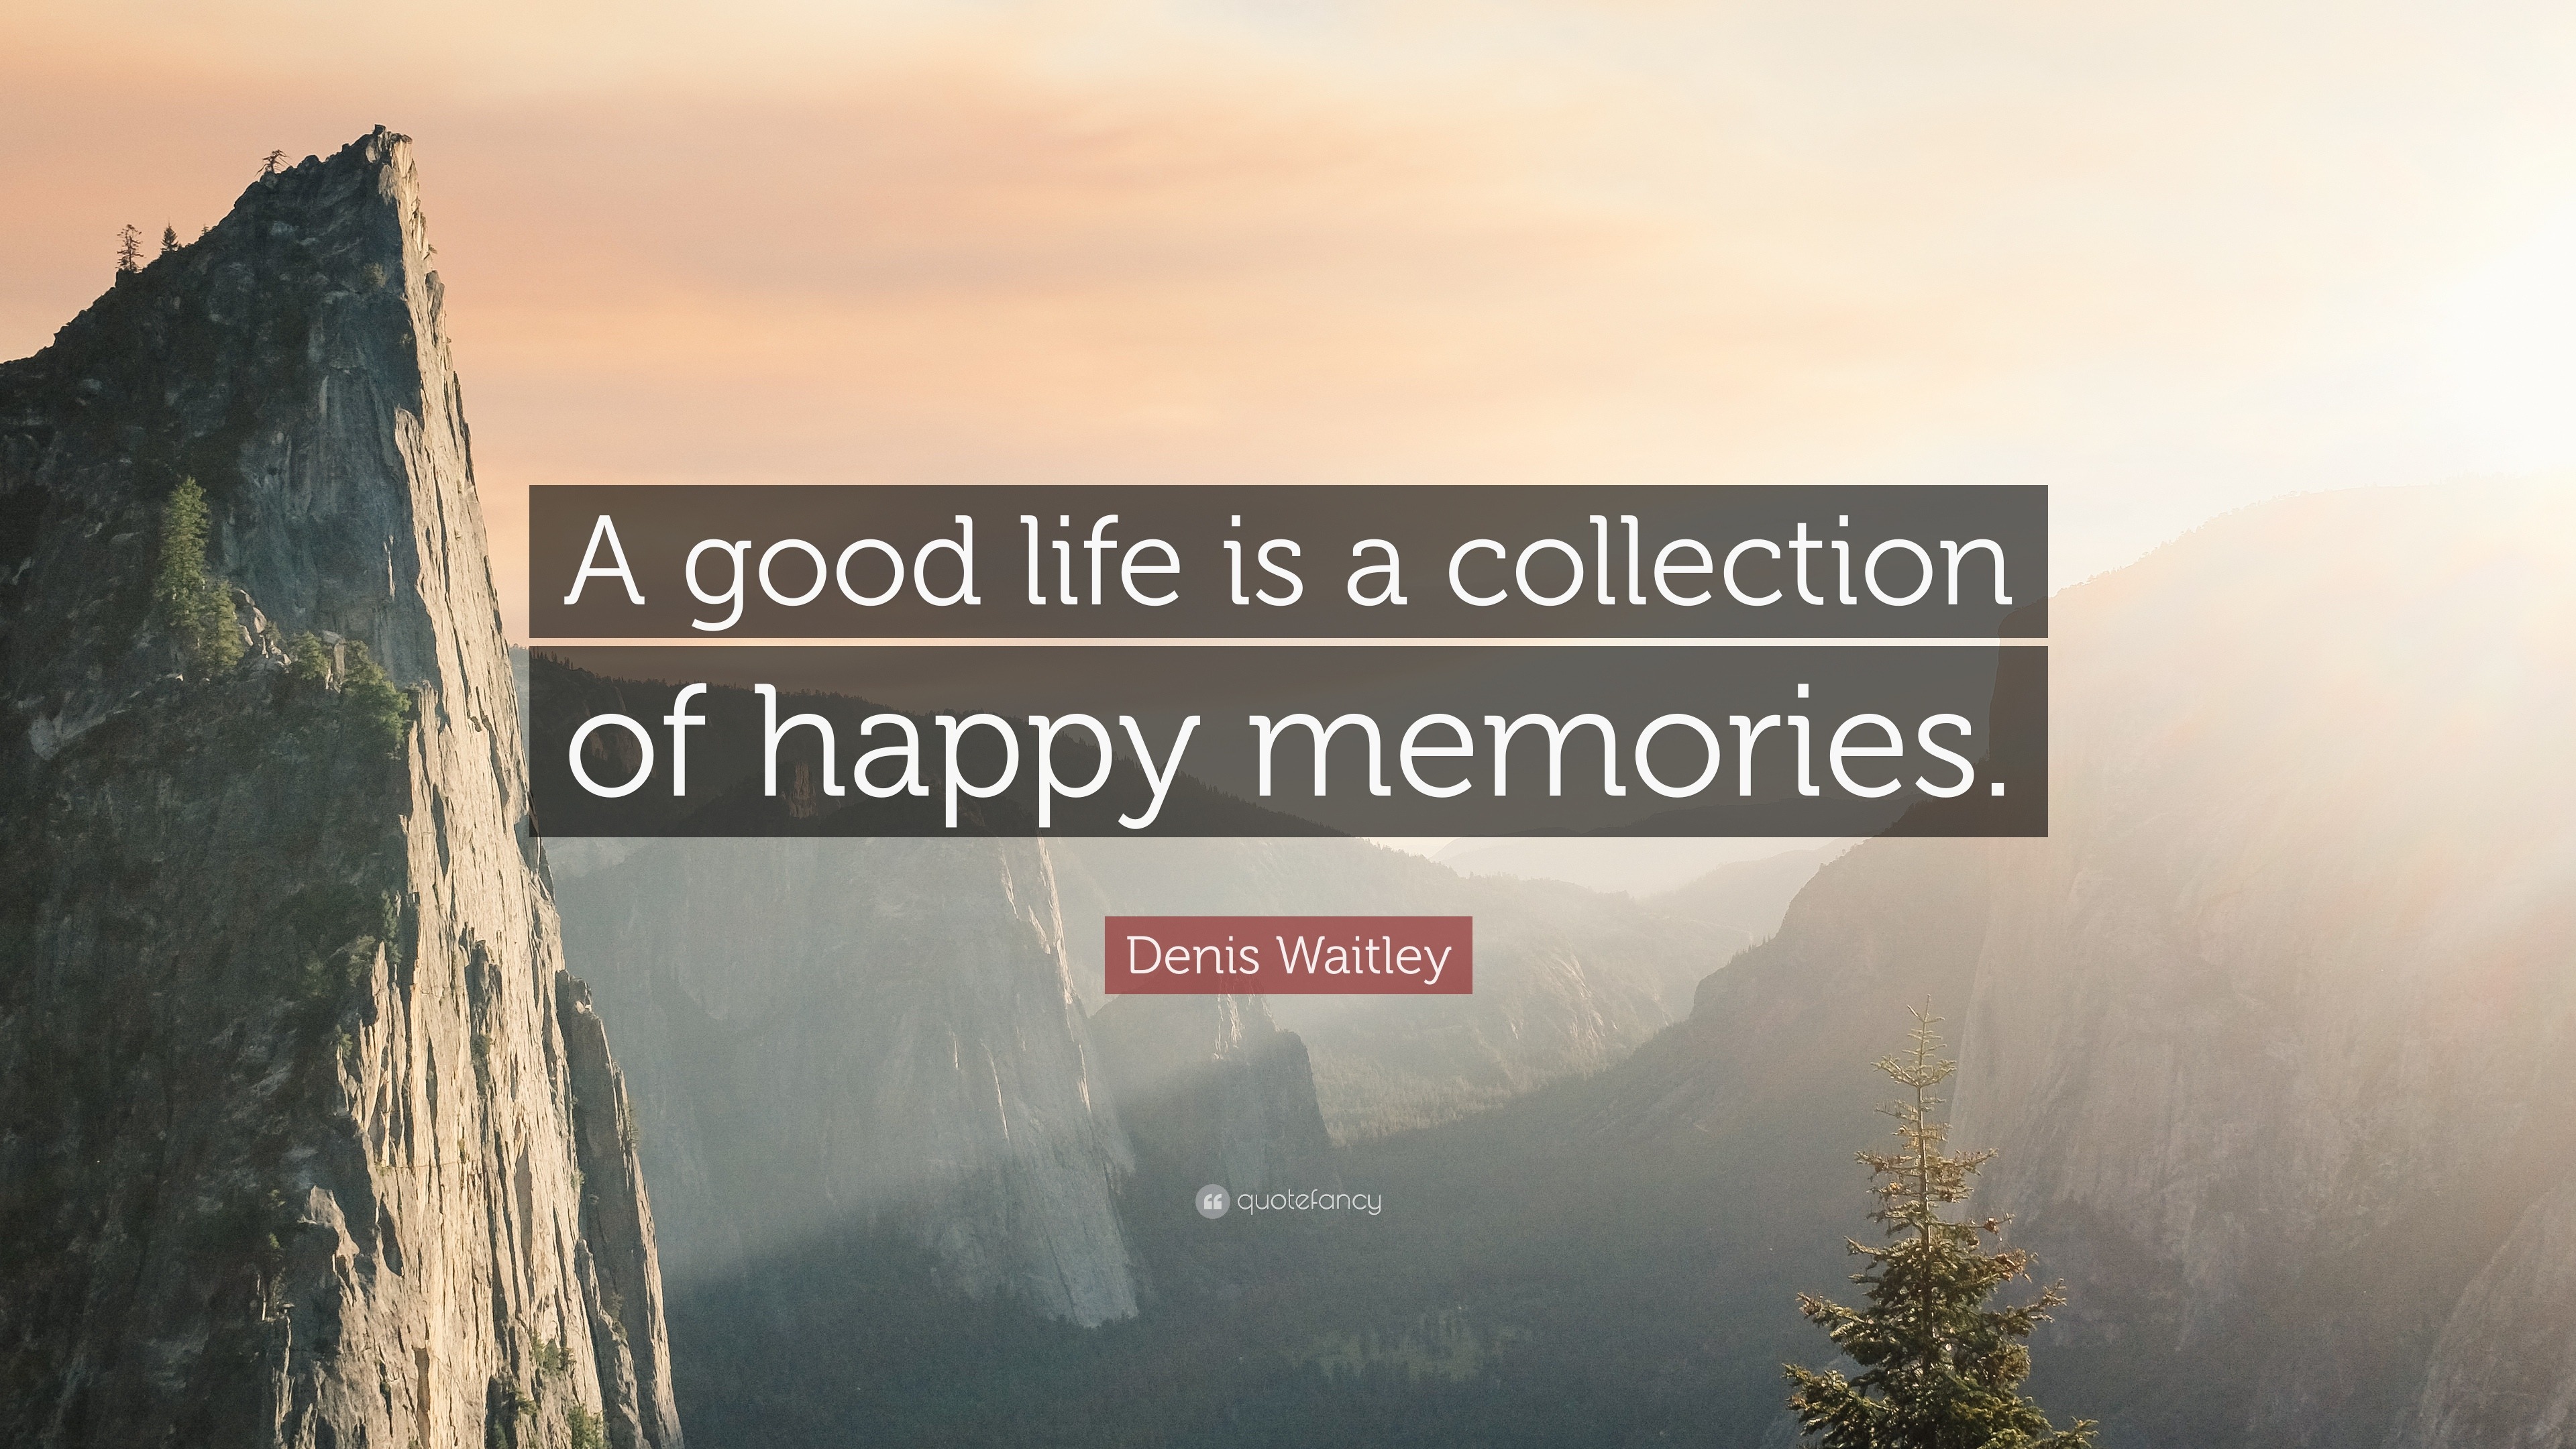 Denis Waitley Quote: "A good life is a collection of happy ...